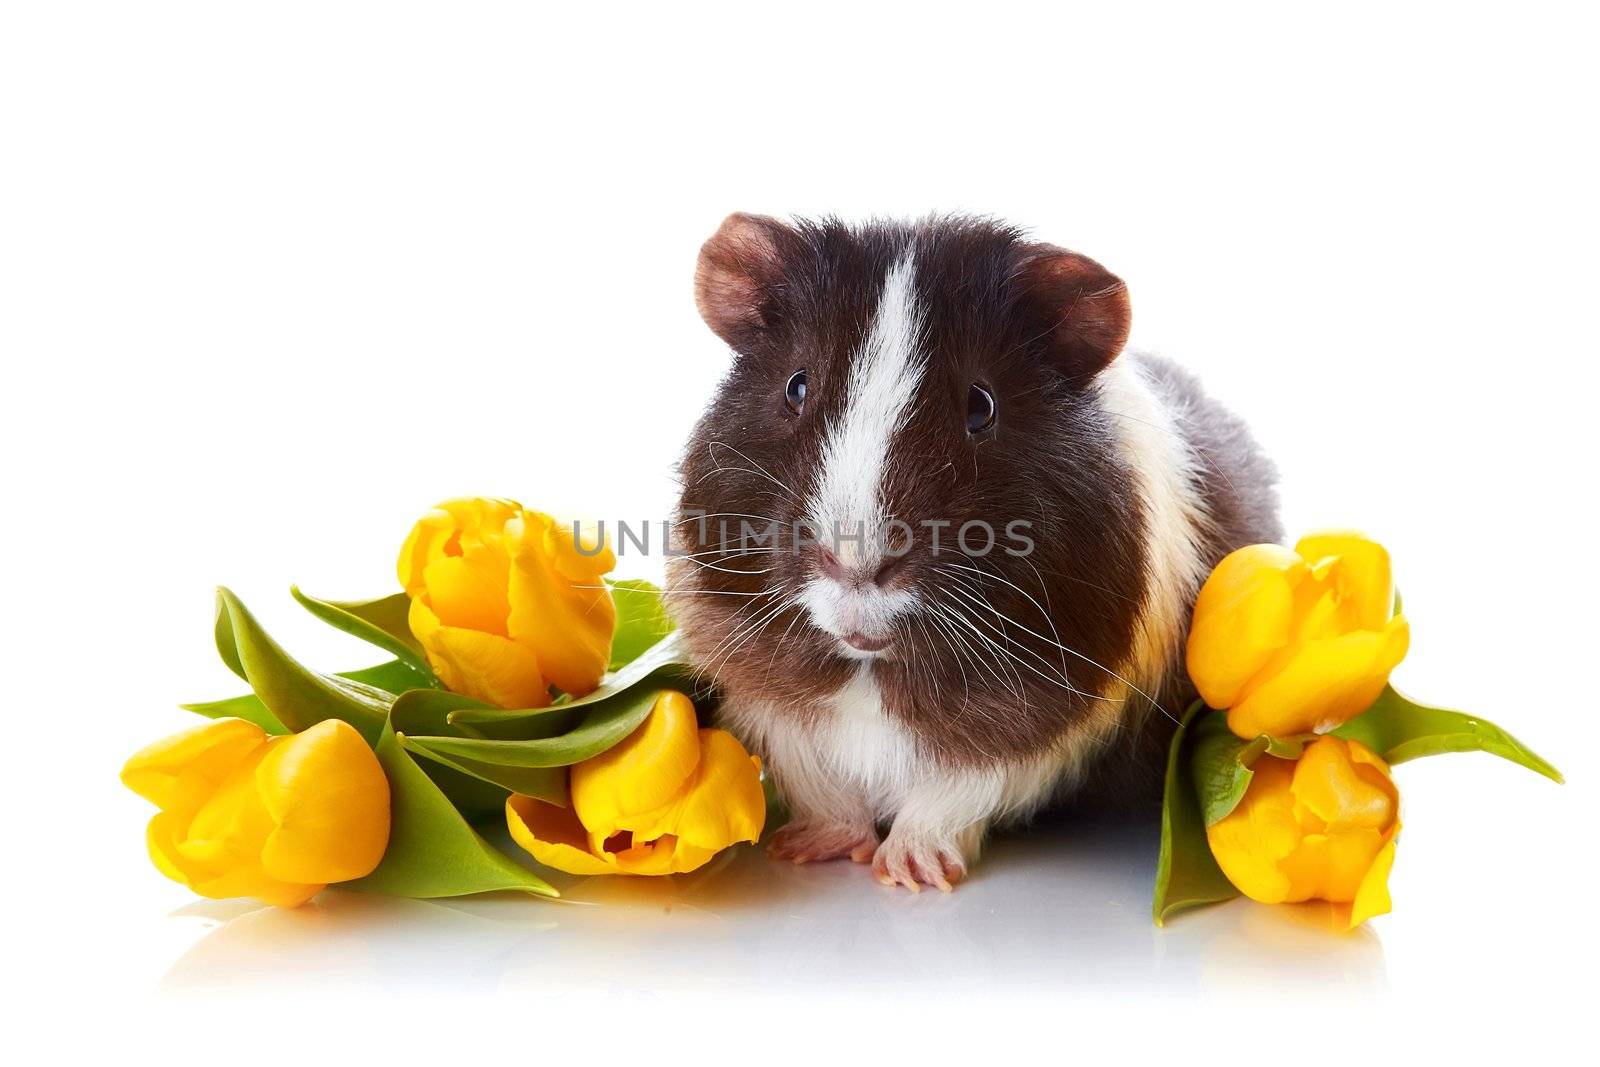 Guinea pig with tulips. Guinea pig and flowers. Small pet. Live gift.